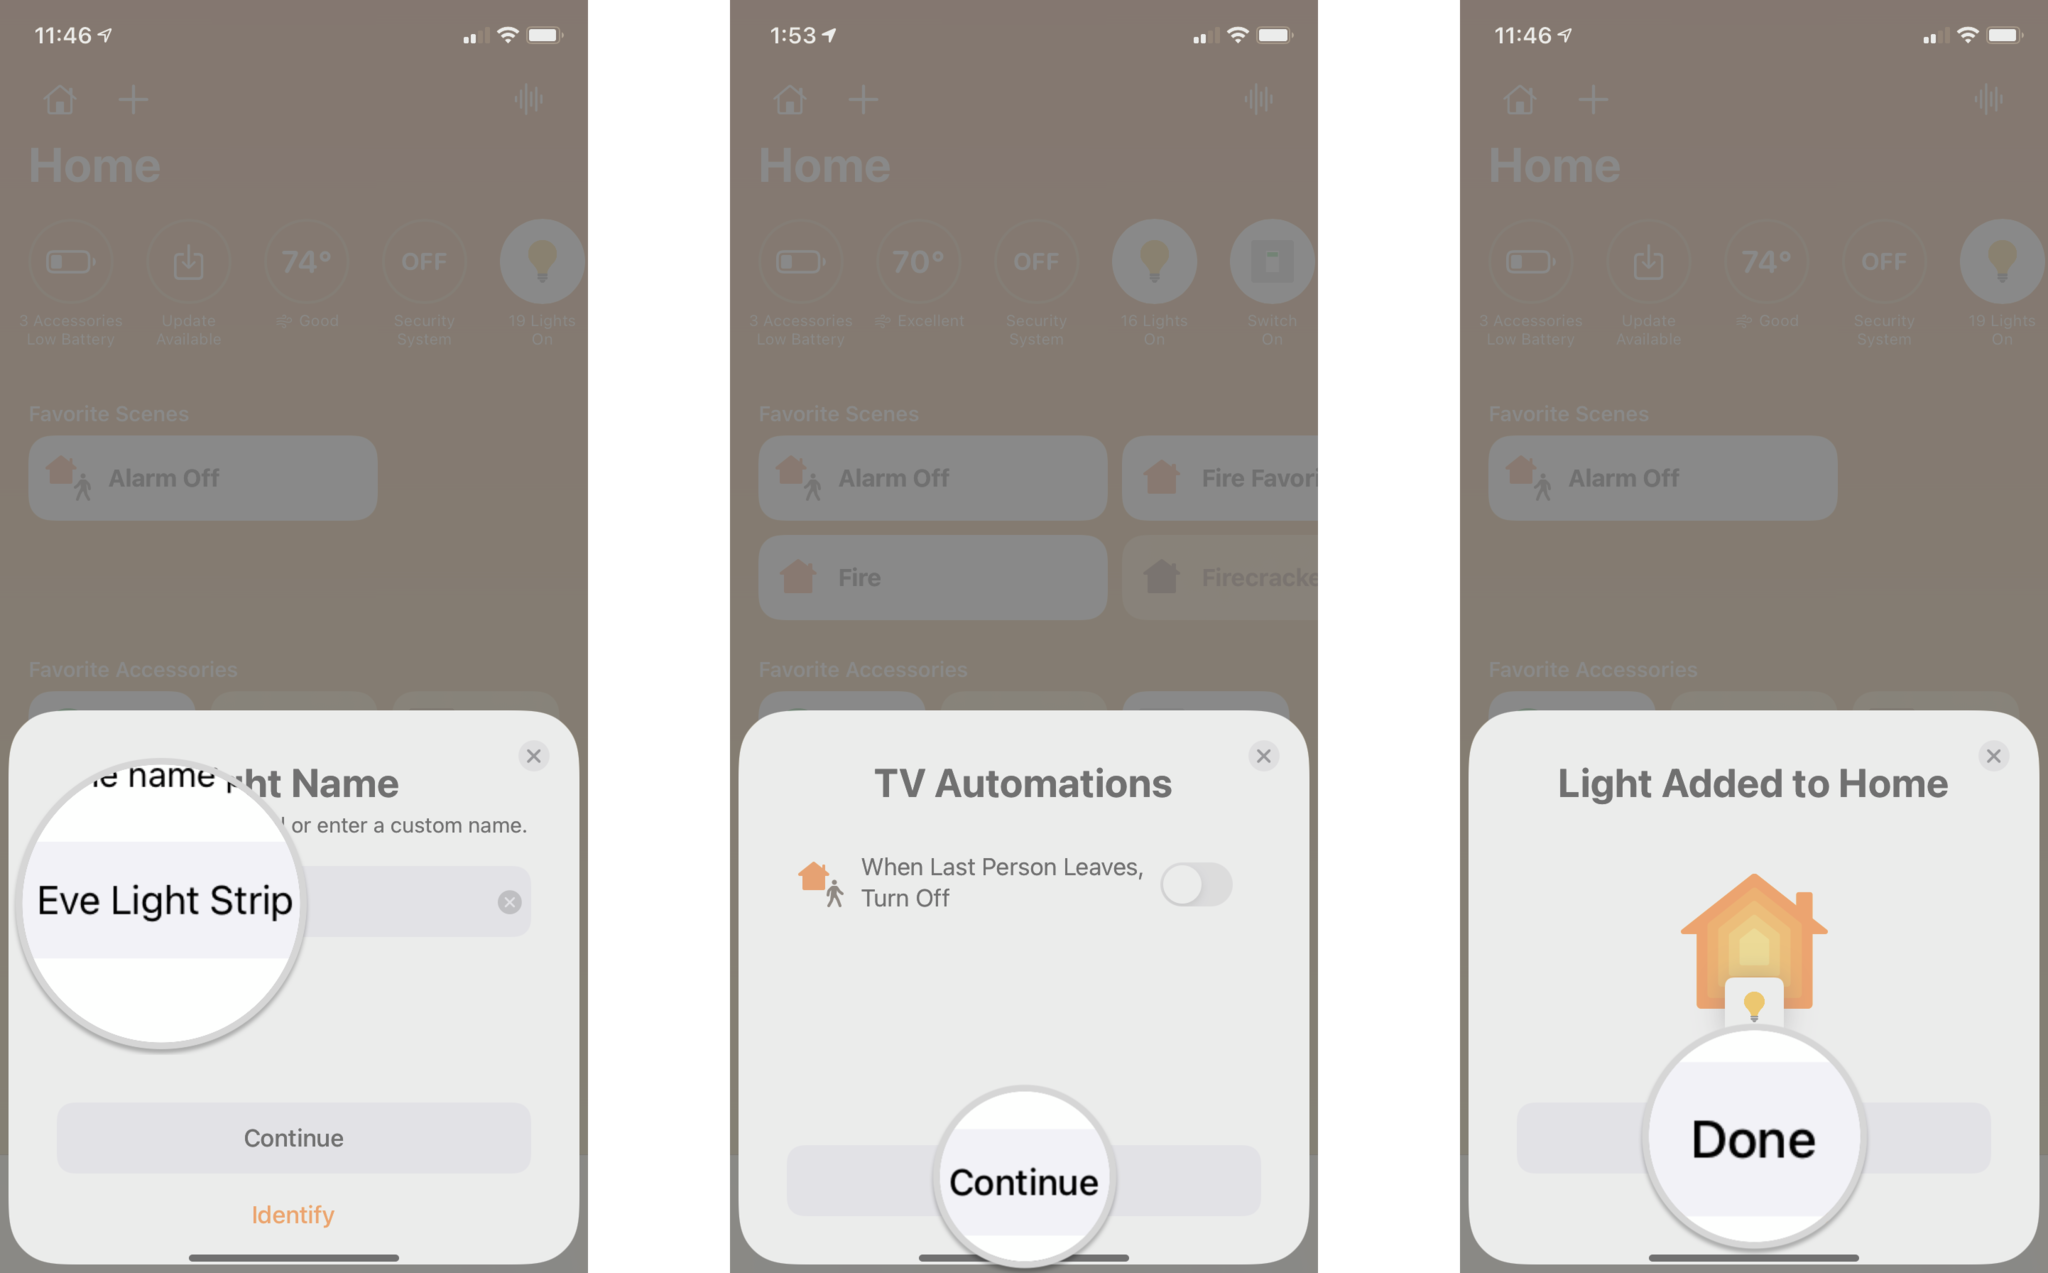 How to add a HomeKit accessory in the Home app on the iPhone by showing steps: Type in a name for the accessory or tap Continue, Turn on any automation options desired then tap Continue, Tap Done